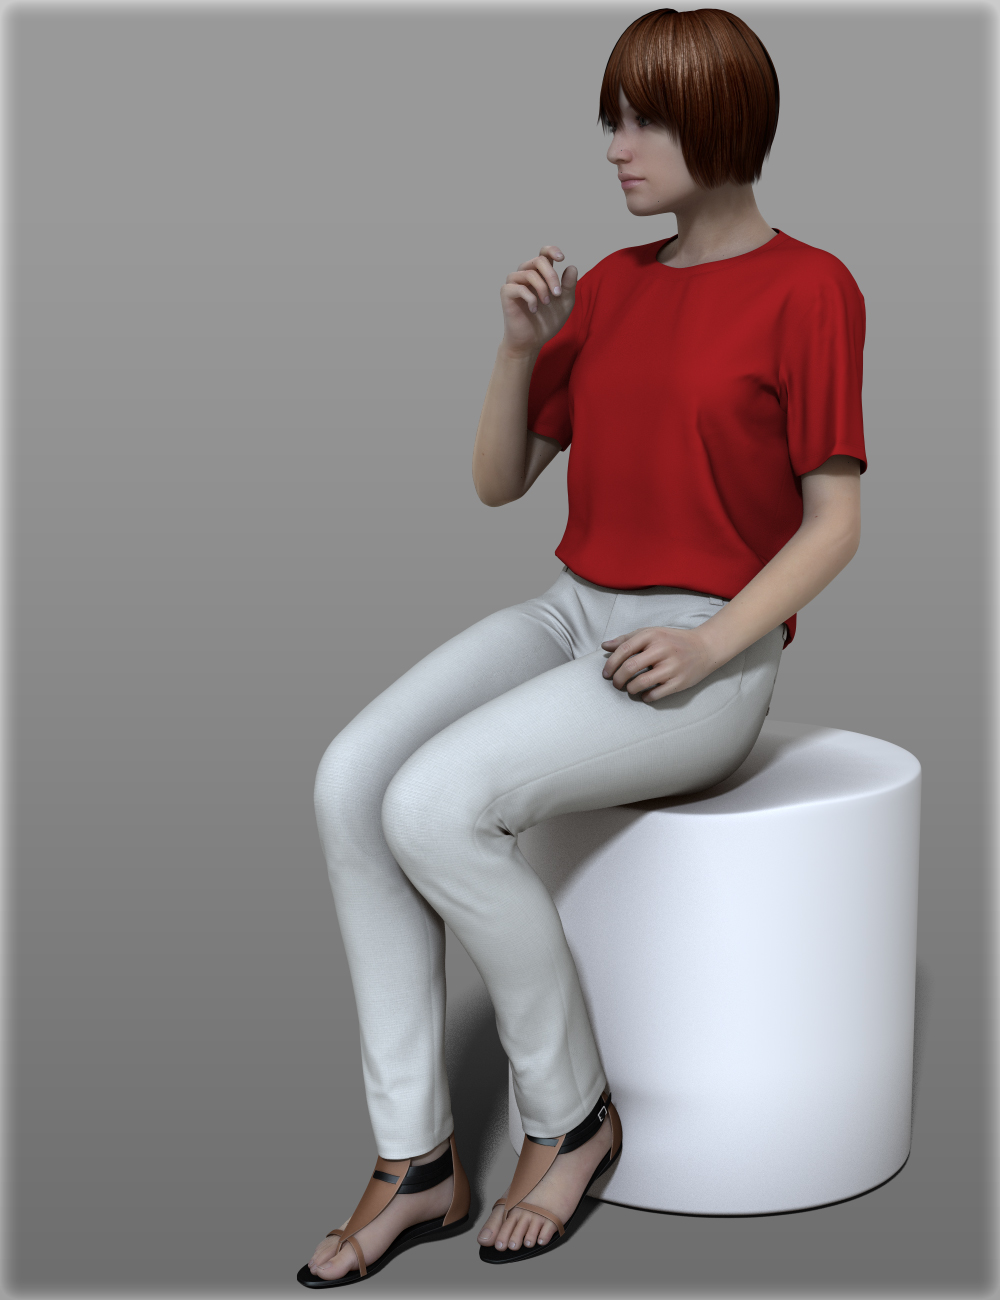 Casual Wear A for Genesis 2 Female(s) by: IH Kang, 3D Models by Daz 3D